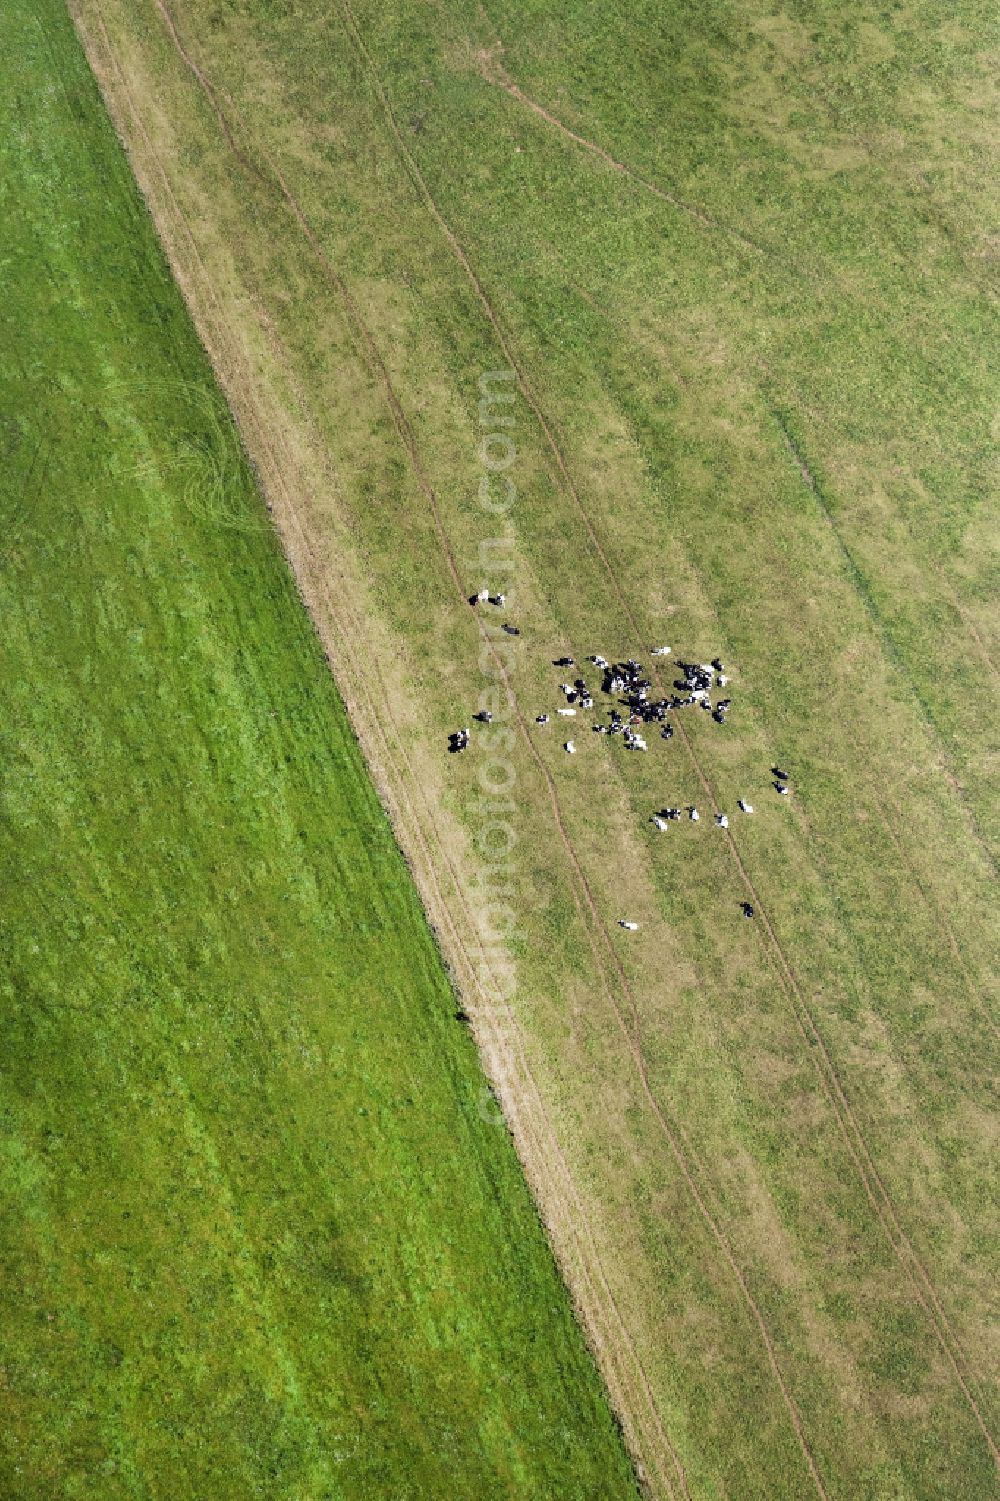 Lenzerwische from the bird's eye view: Grass area-structures meadow pasture with cattle - herd in Lenzerwische in the state Brandenburg, Germany